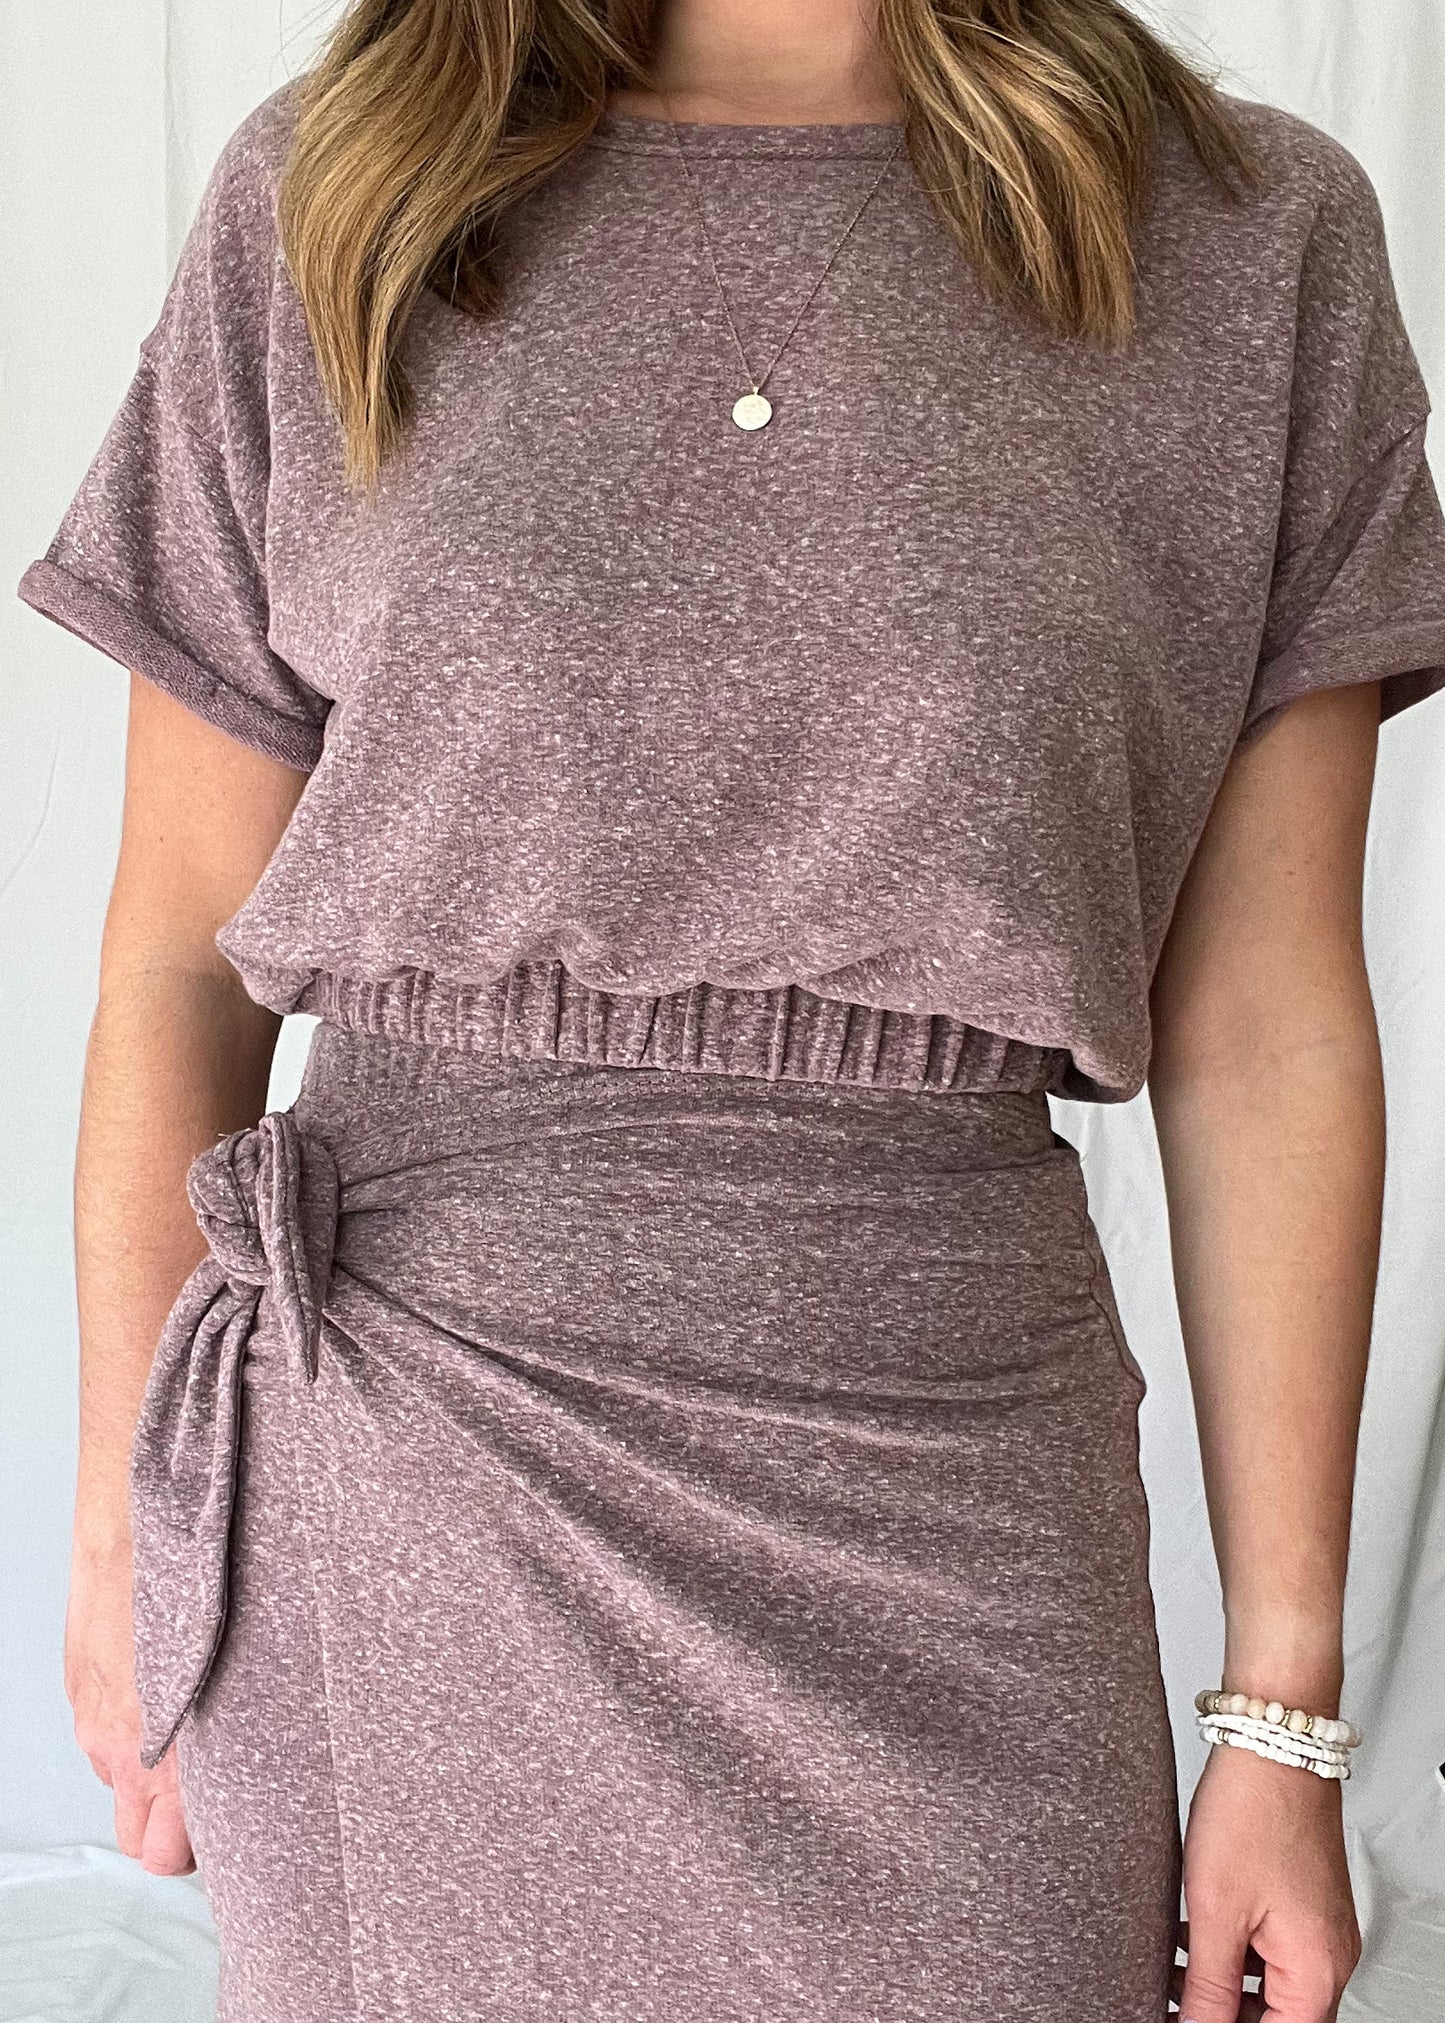 The Heather Banded Top